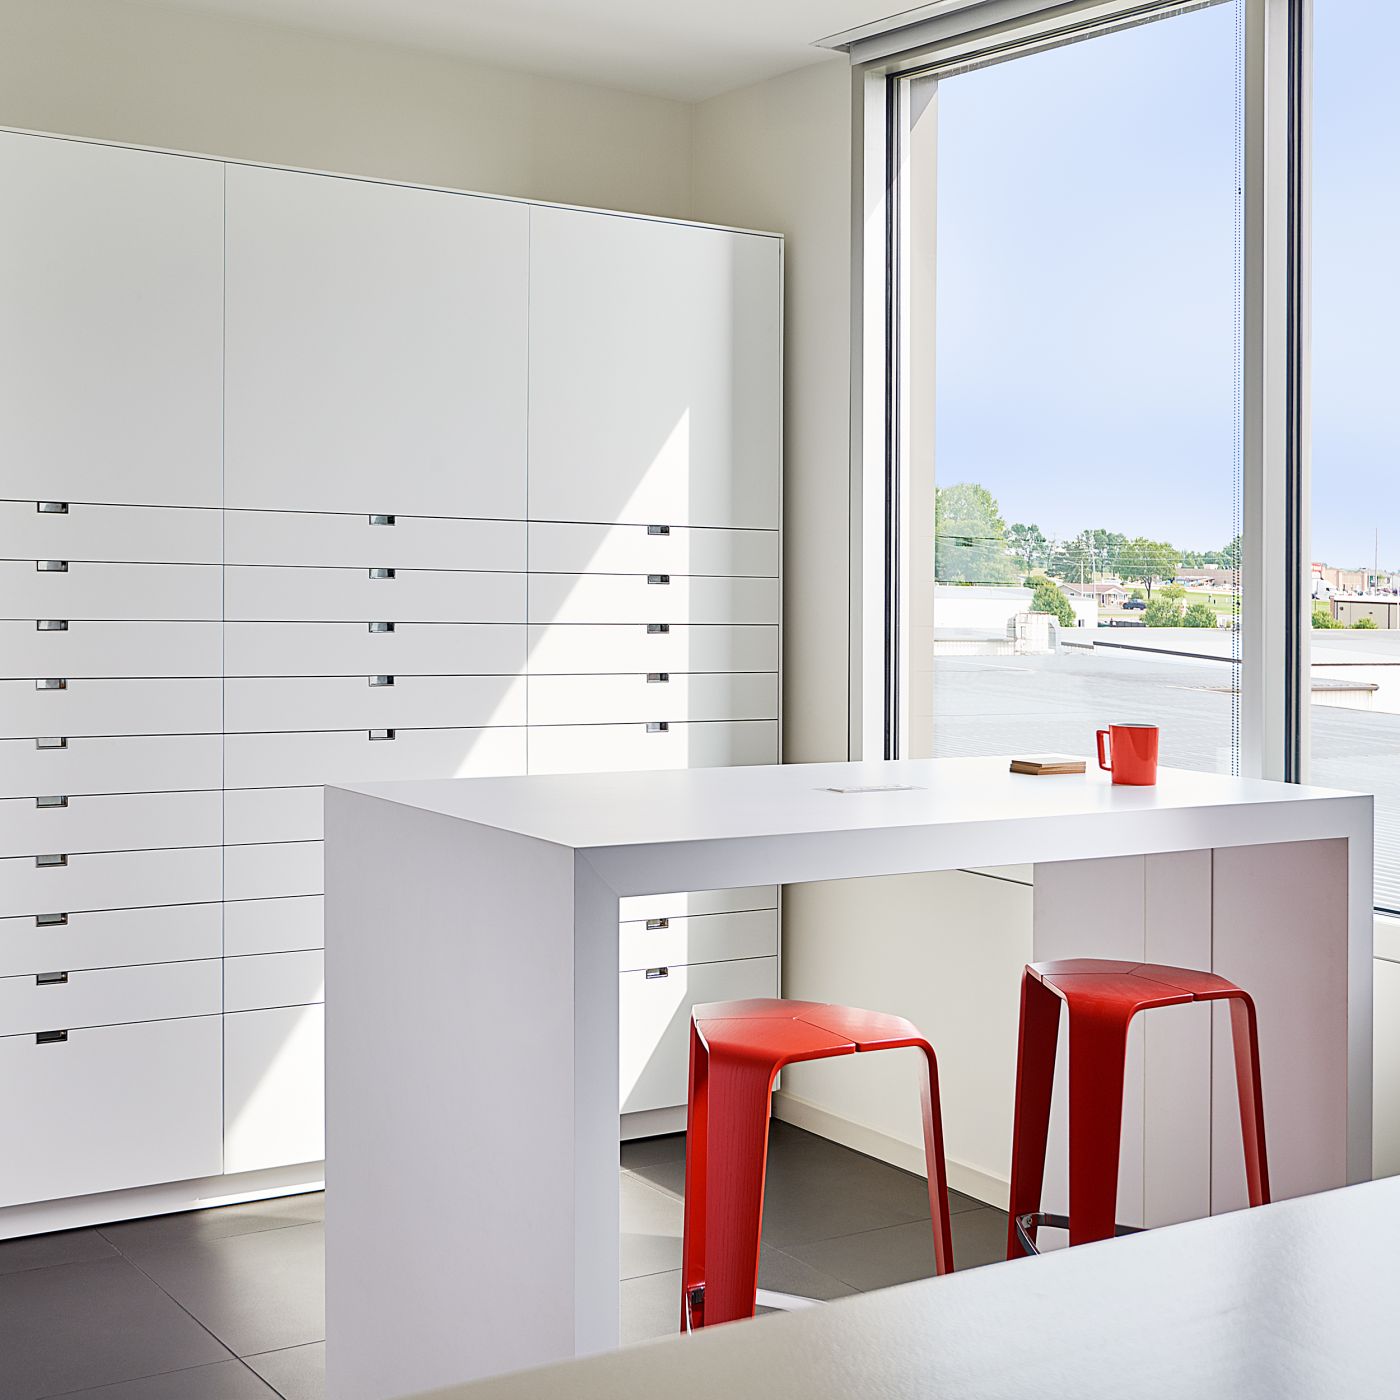 Our sample room features custom LEX storage and HUGO table in Designer White.